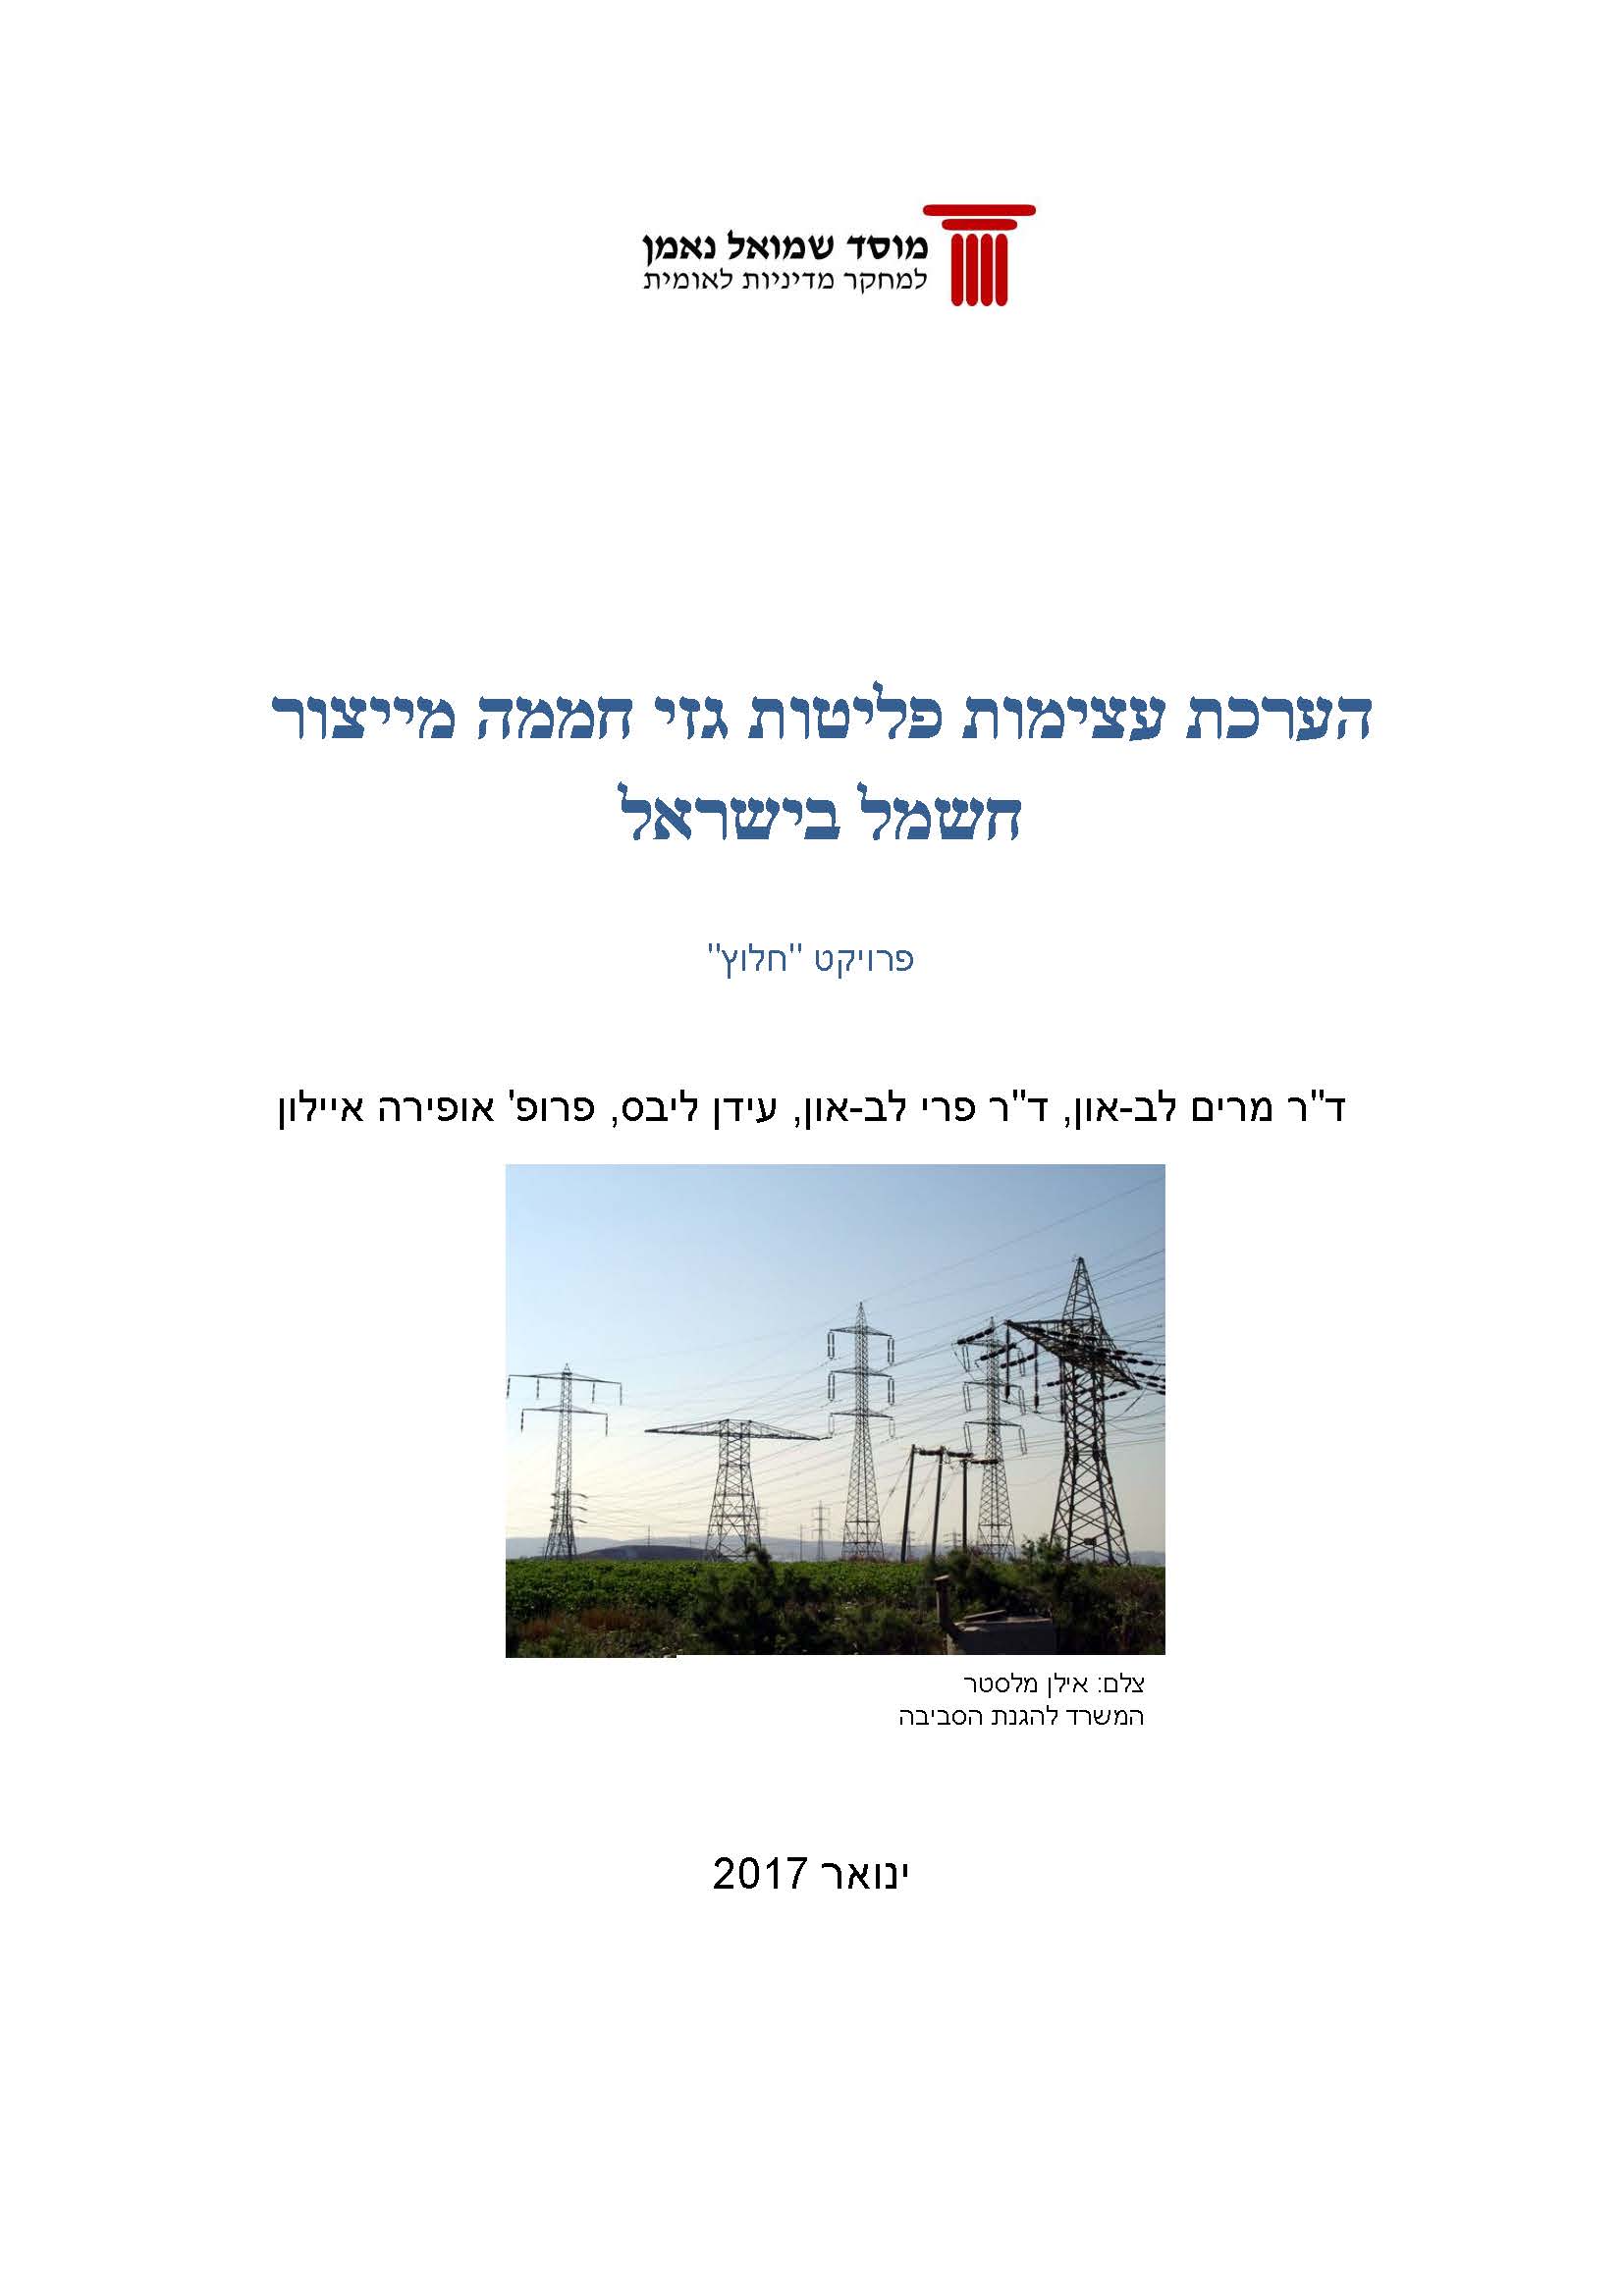 Assessment of greenhouse gas emissions intensity from electricity generation in Israel